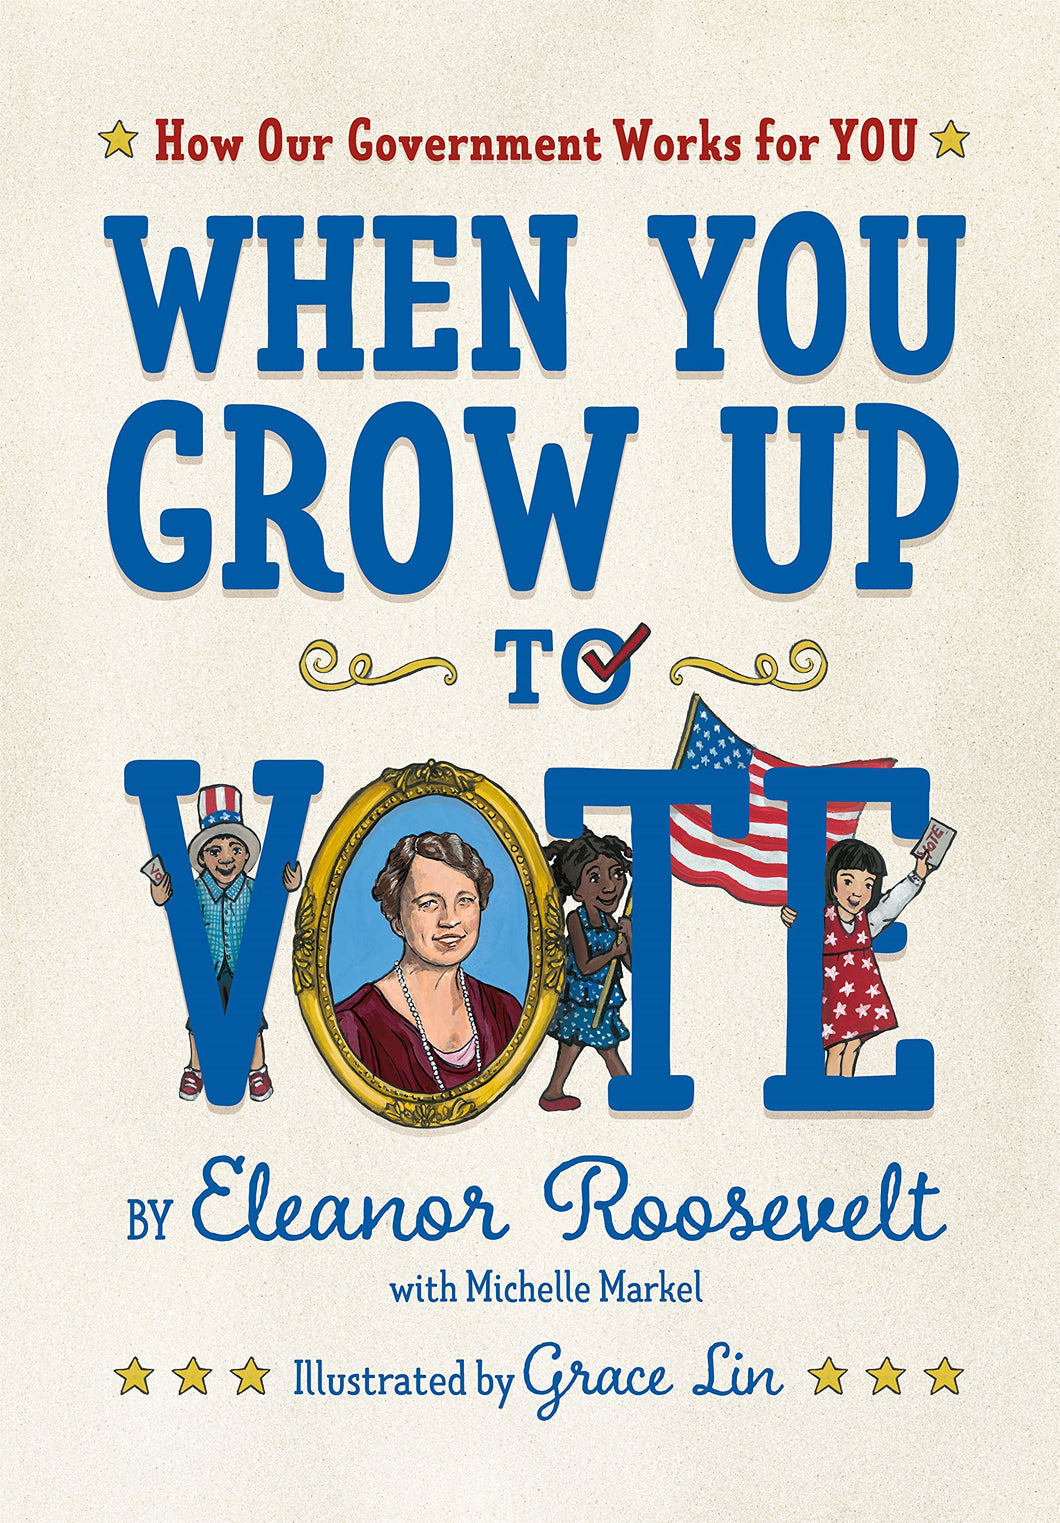 When You Grow Up to Vote: How Our Government Works for You by Eleanor Roosevelt